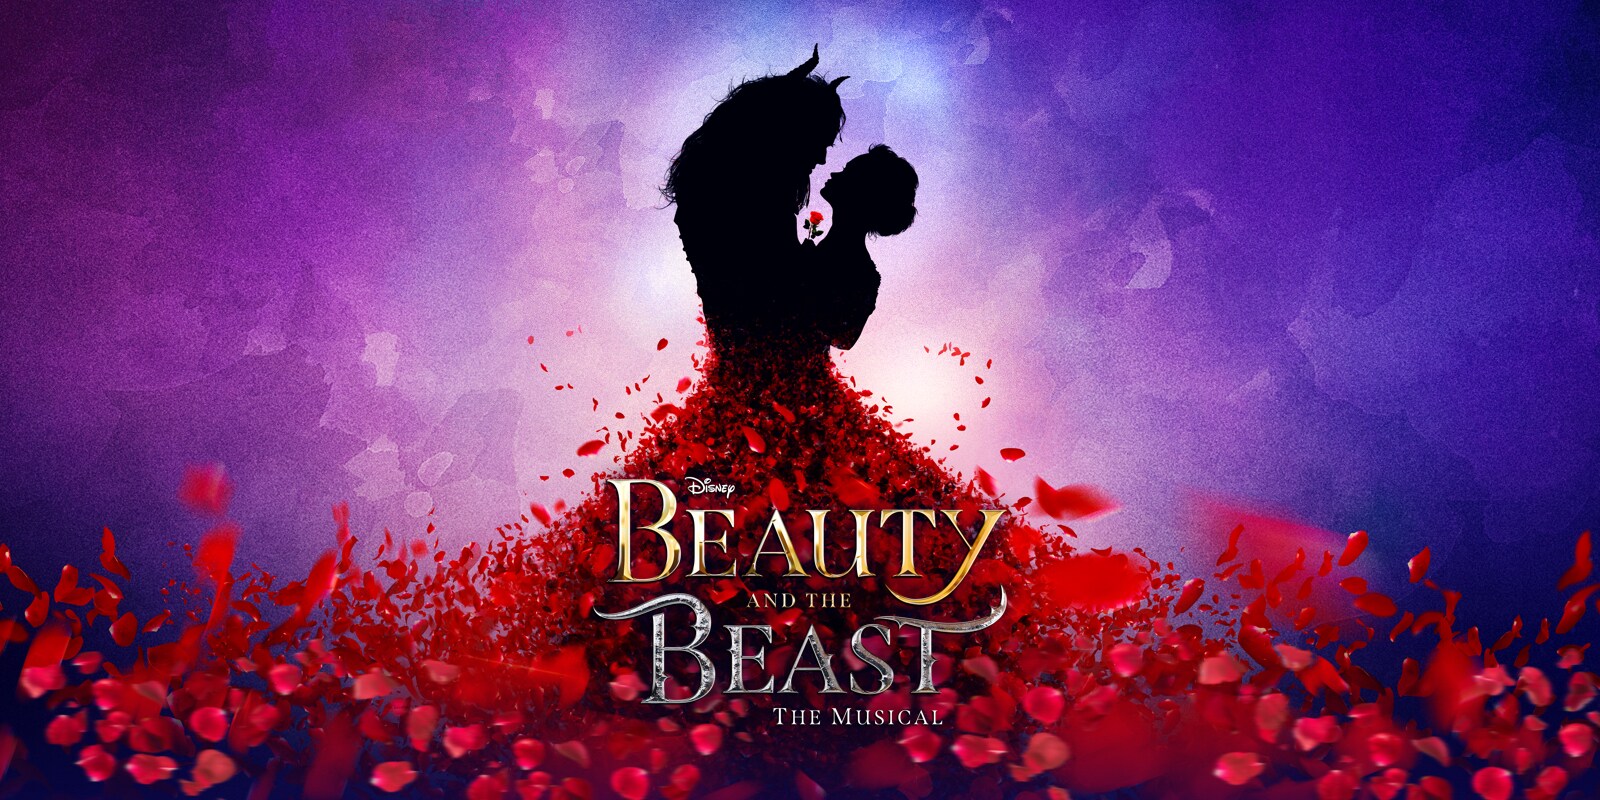 A silhouette of Belle and the Beast dancing, with red petals forming as Belle's dress skirt